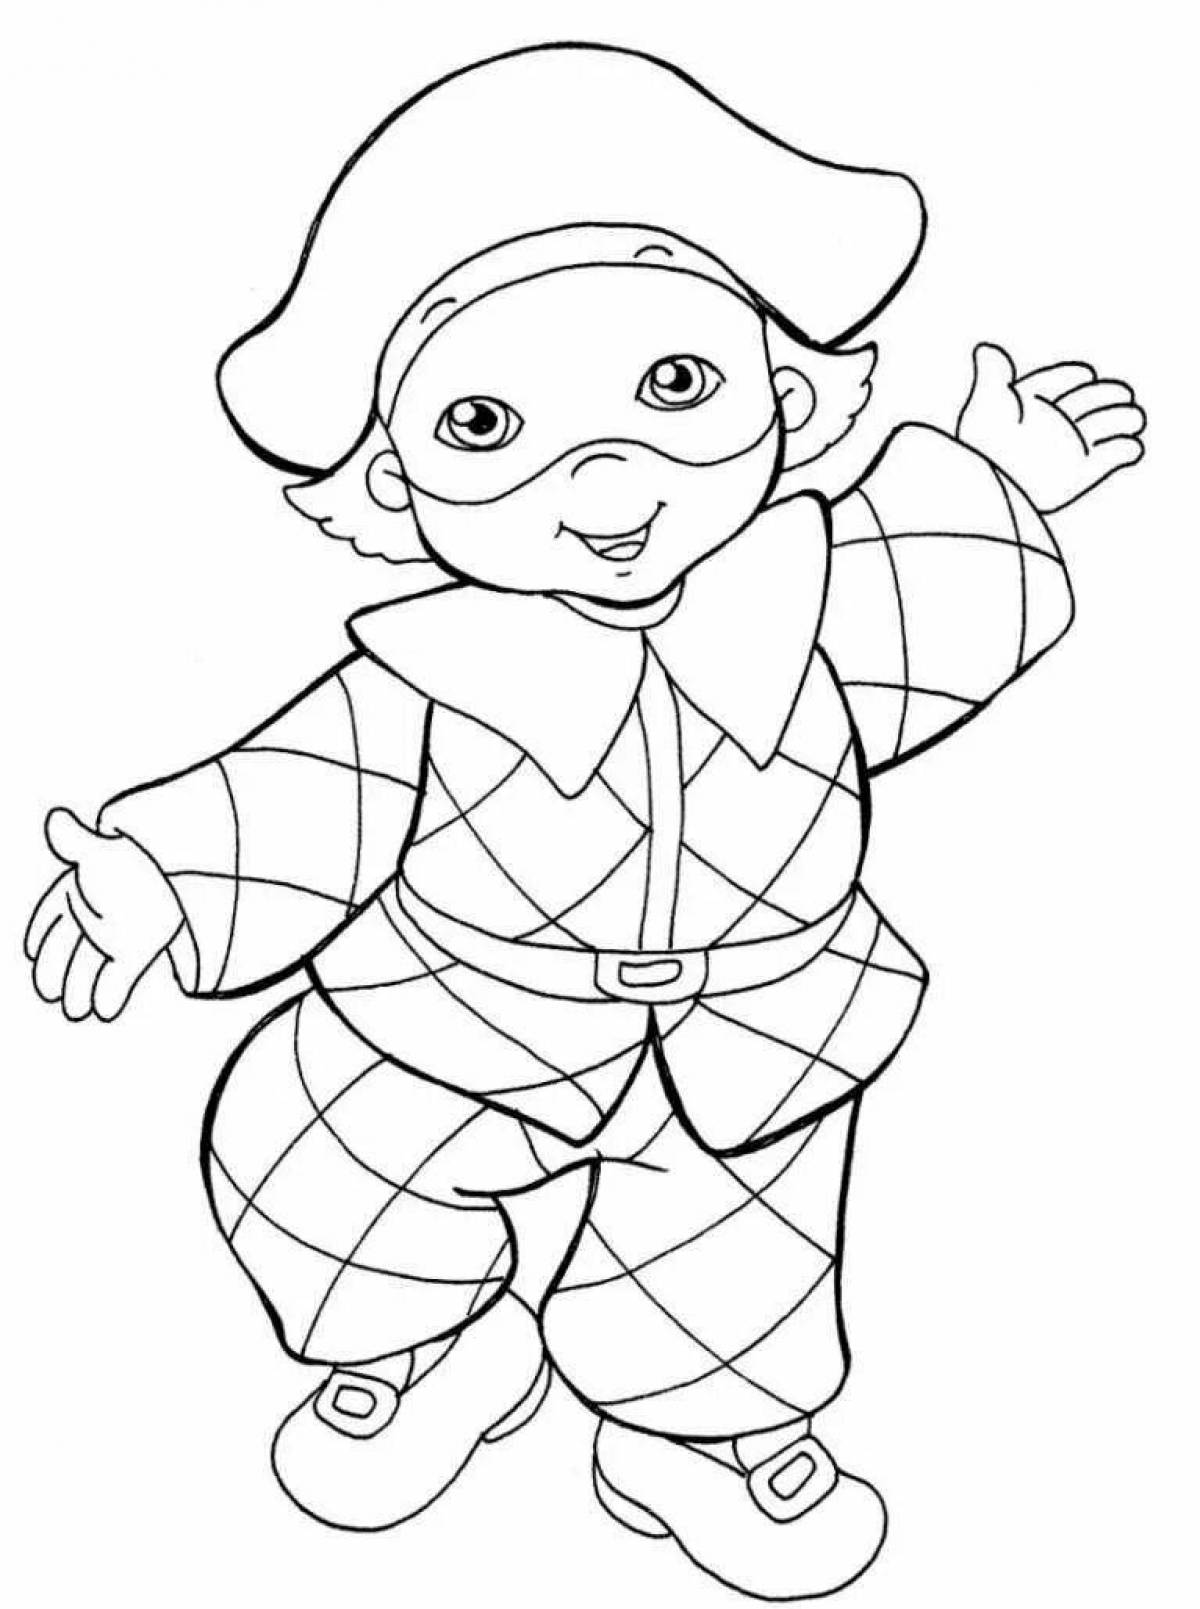 Cute parsley coloring page